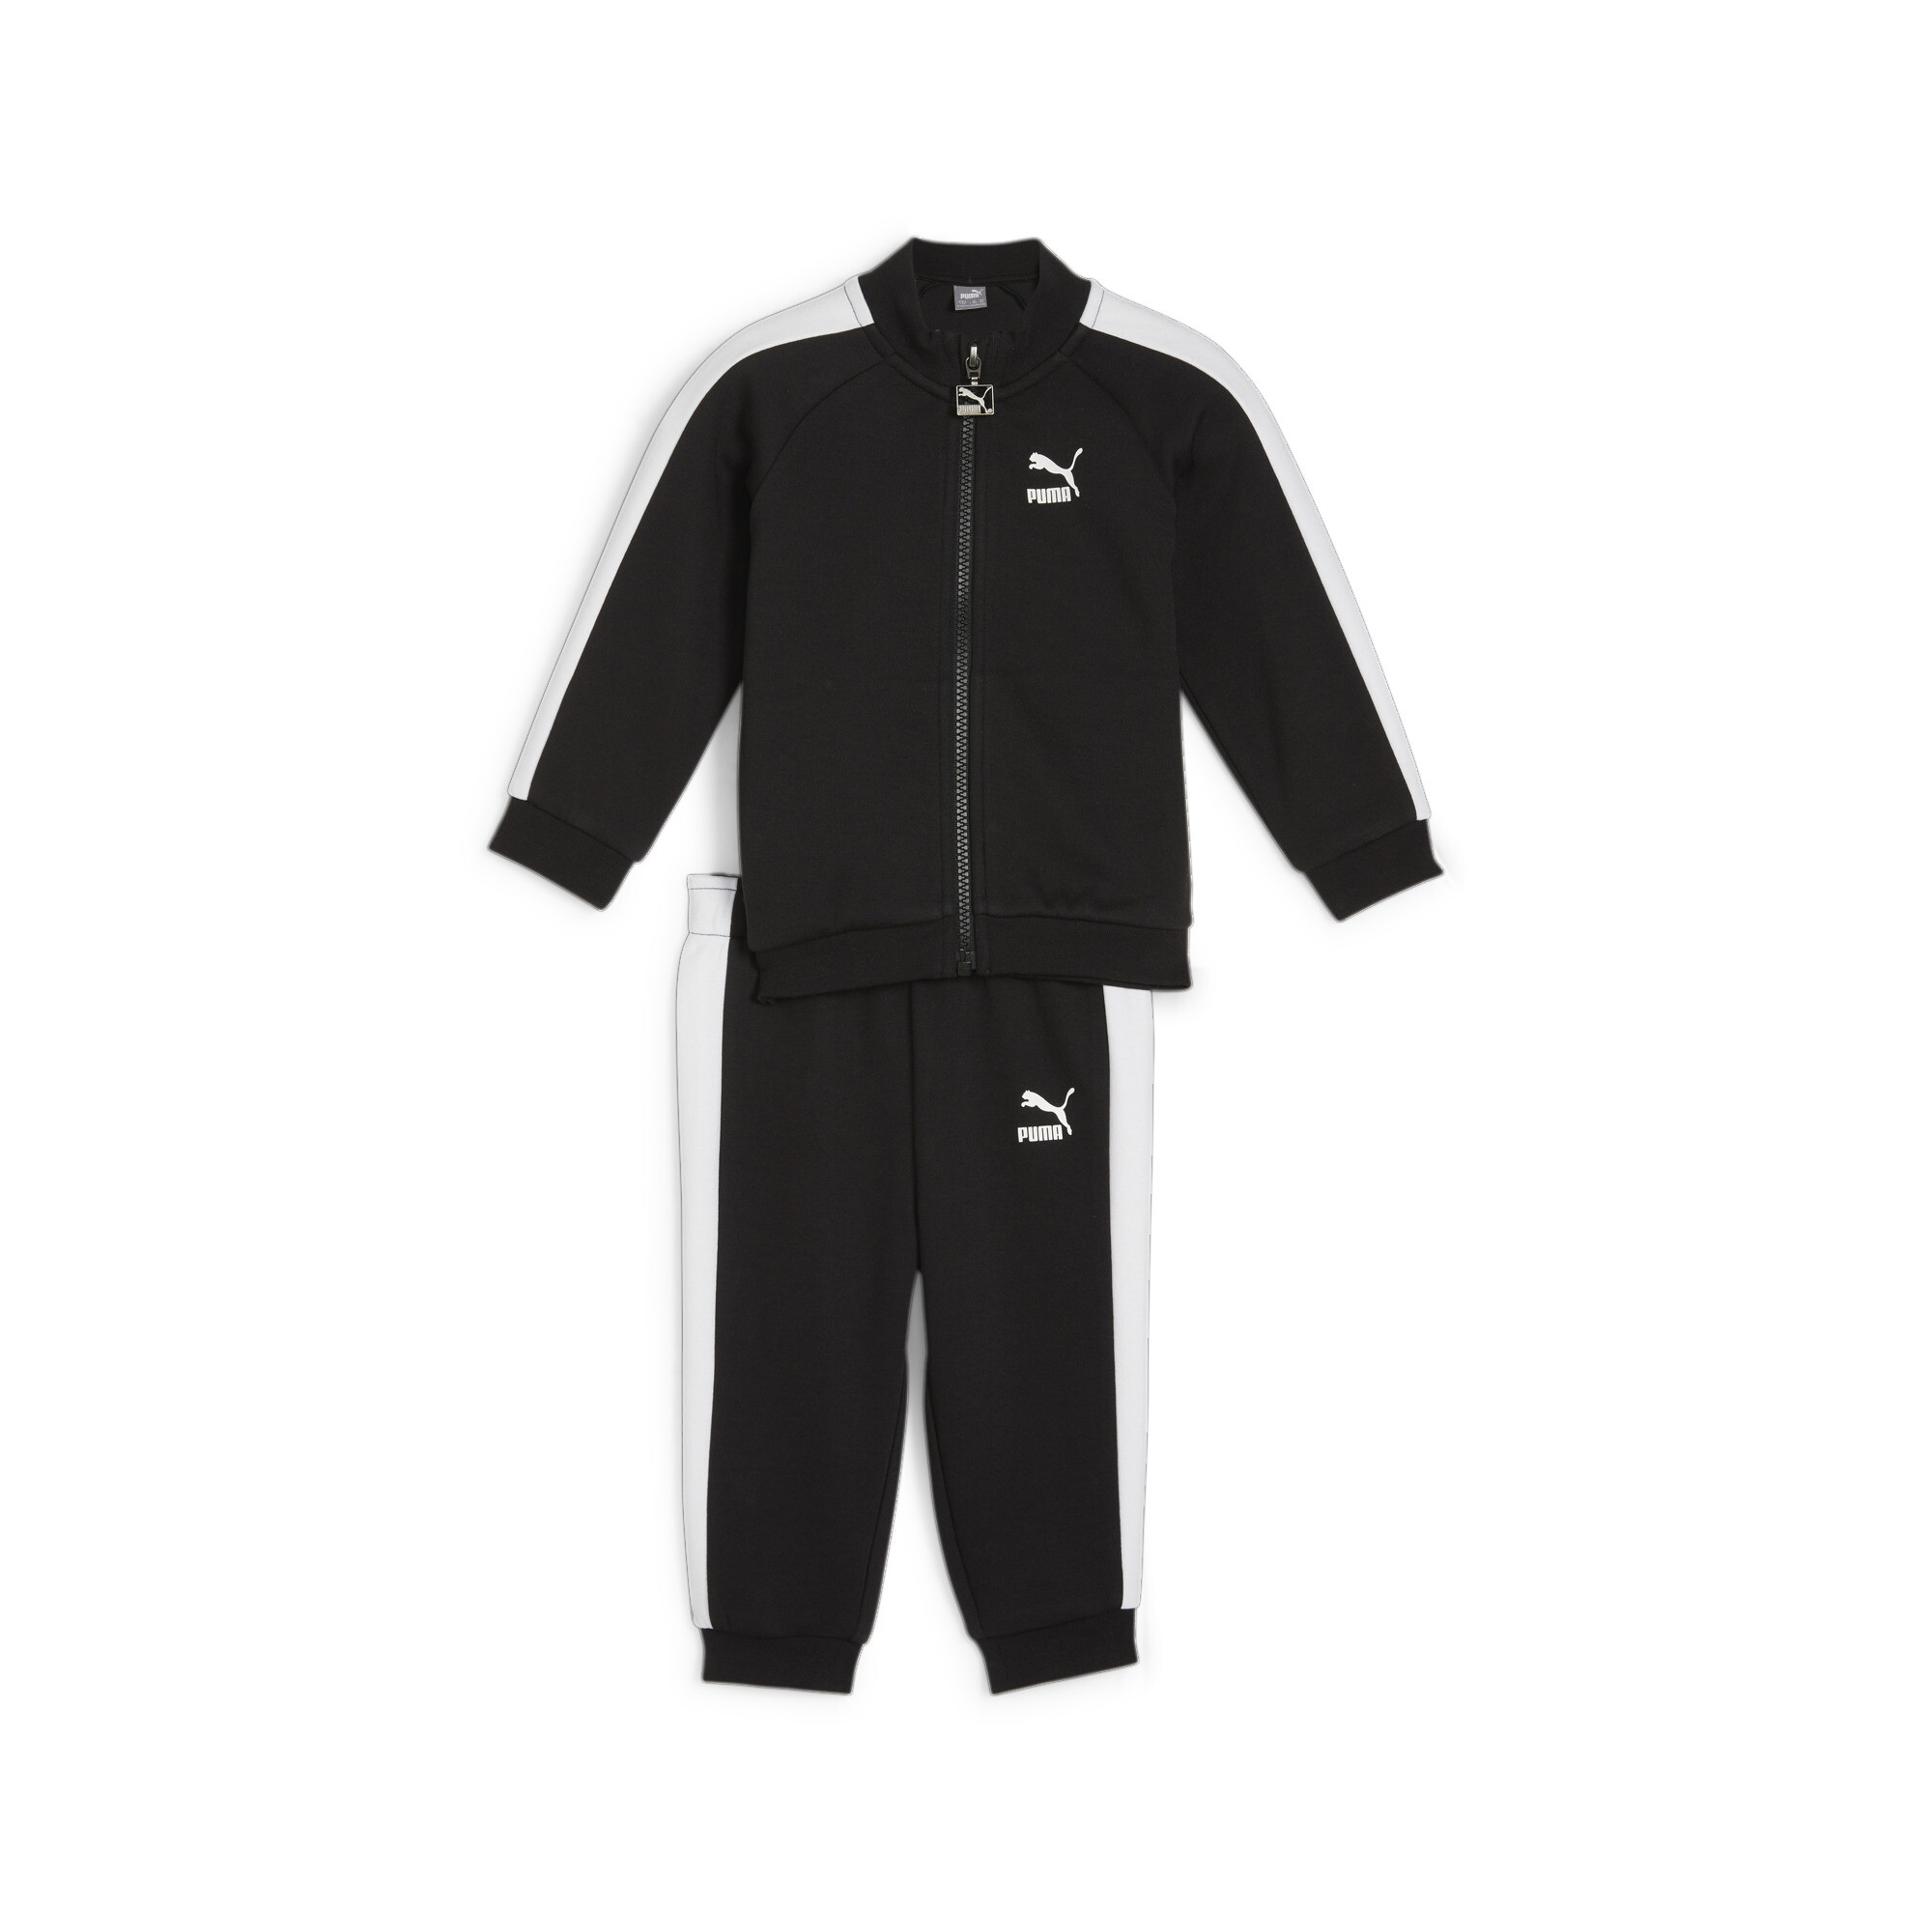 Kids' PUMA MINICATS T7 ICONIC Baby Tracksuit Set In Black, Size 2-4 Months